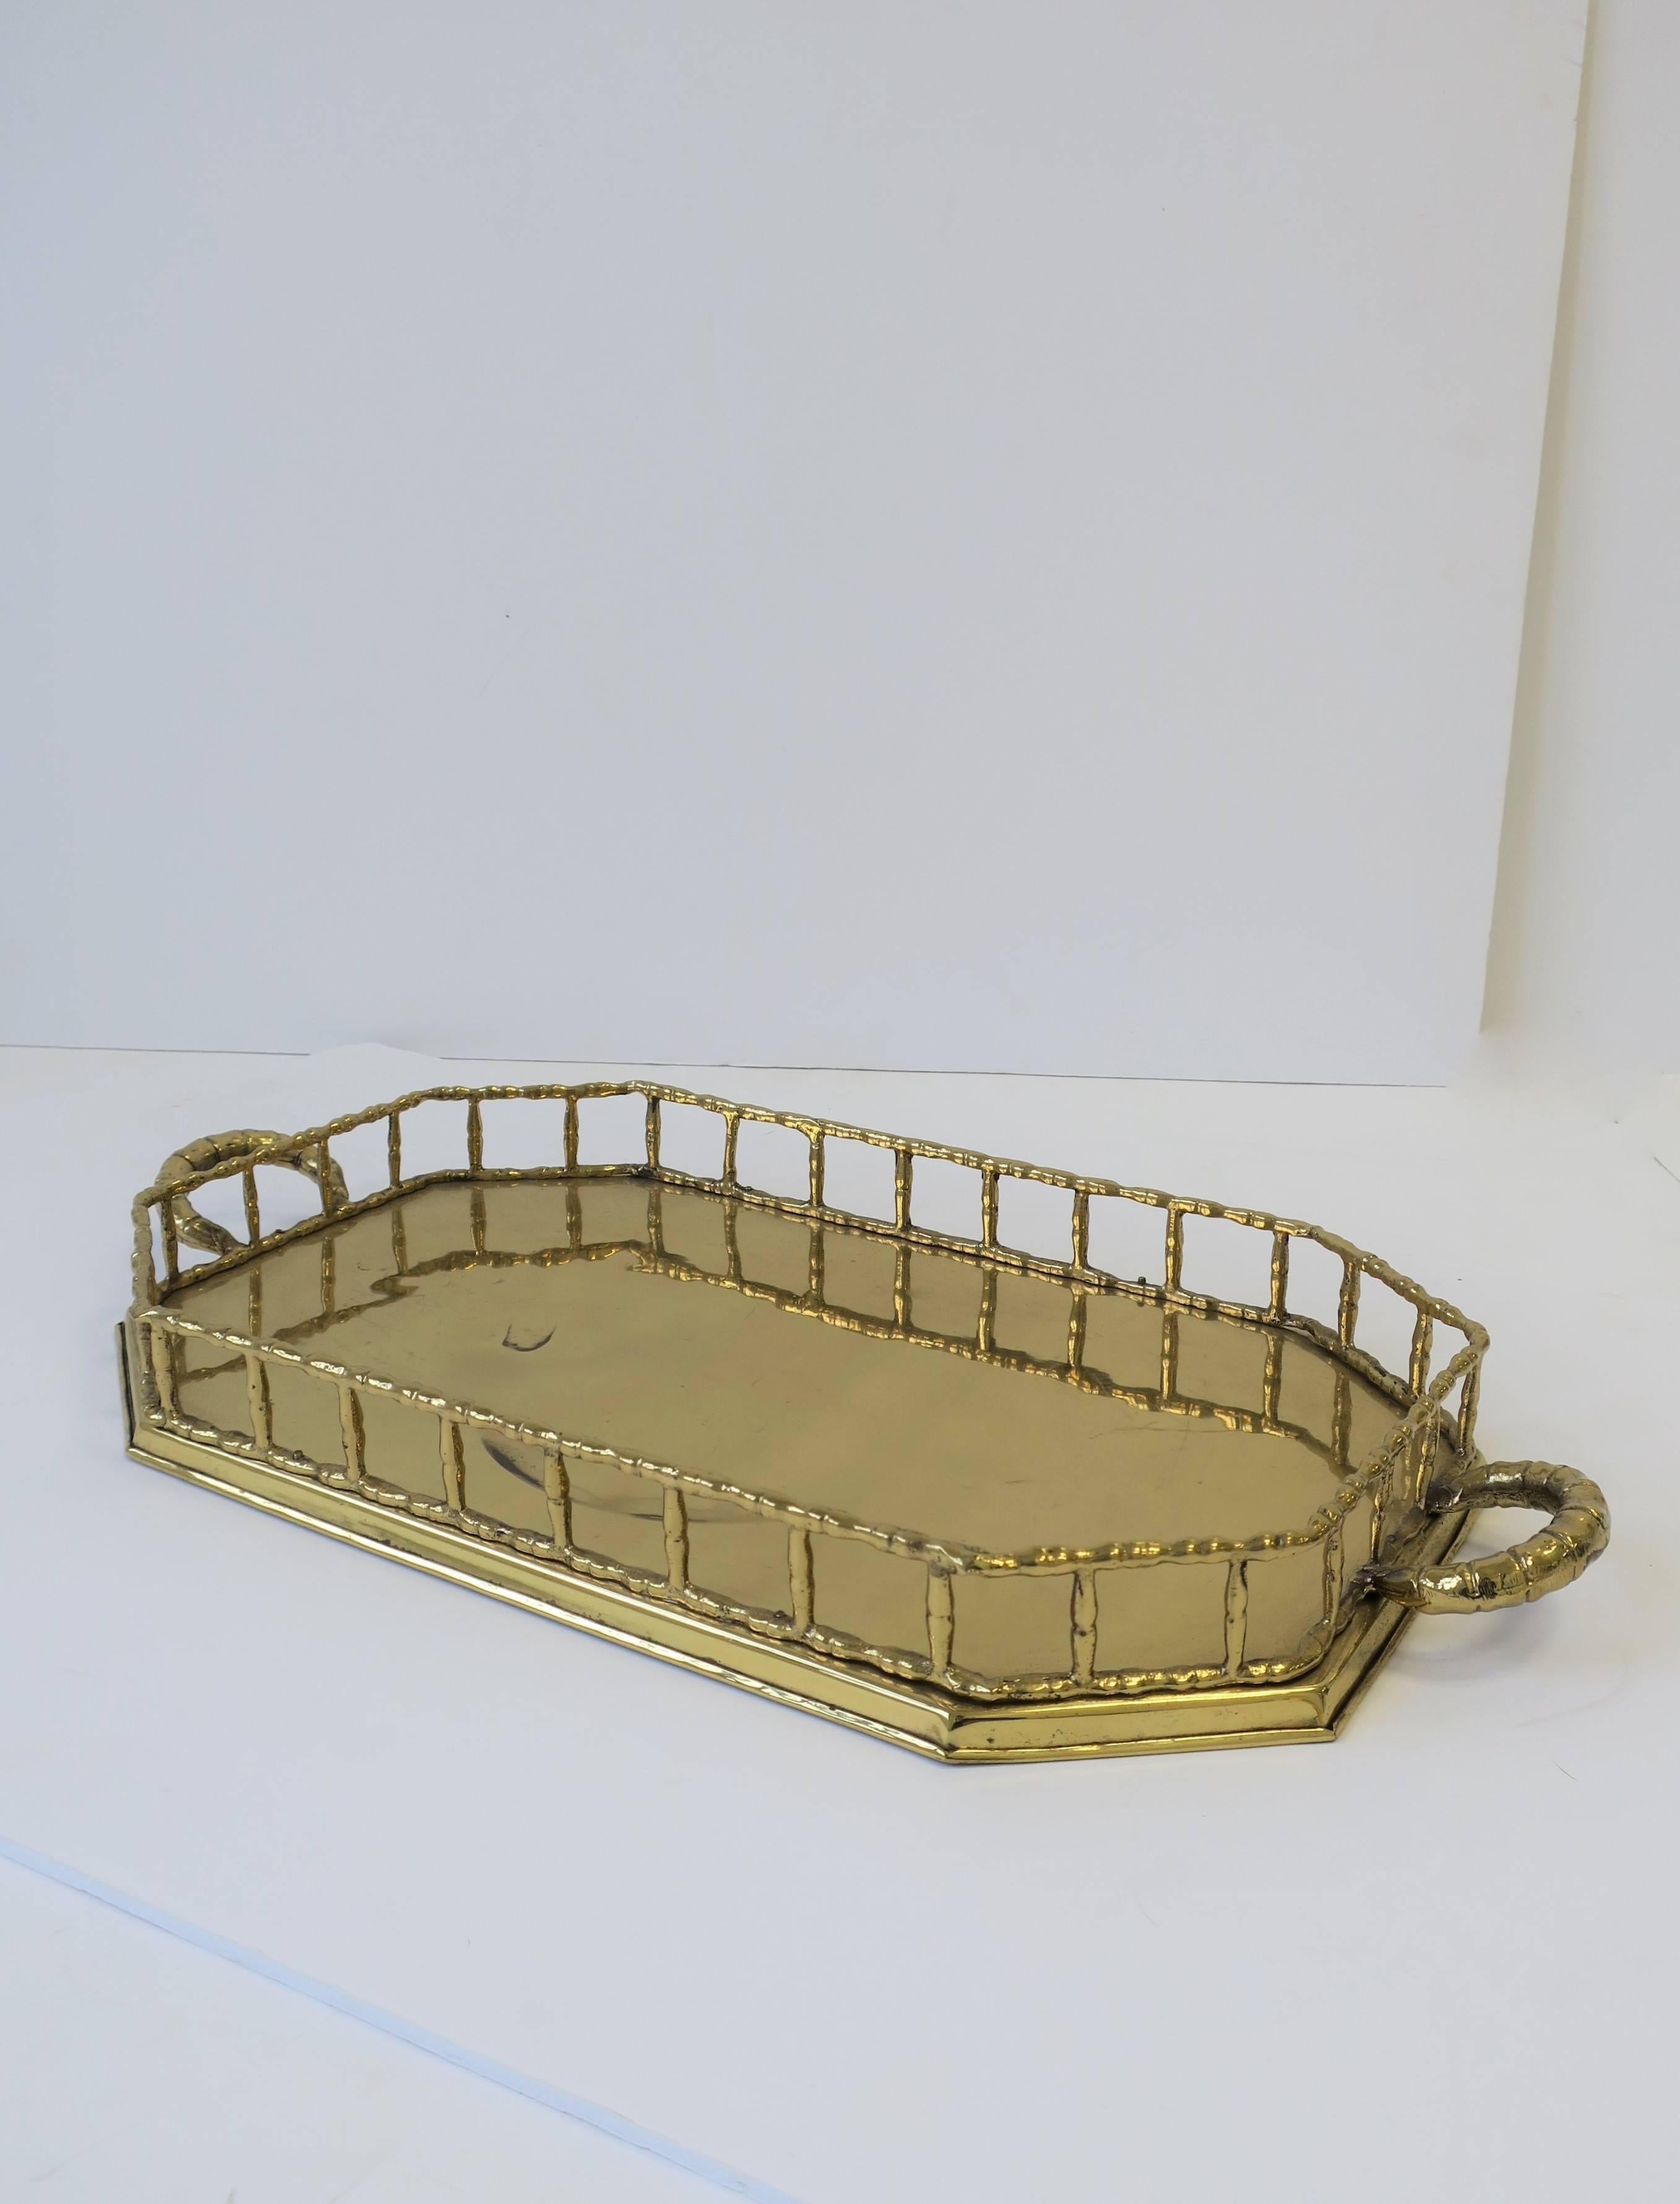 A beautiful vintage octagonal brass tray with decorative 'bamboo' style edge and handles. 

Tray measures: 20.75 in. W x 10 in. D x 2 in. H

